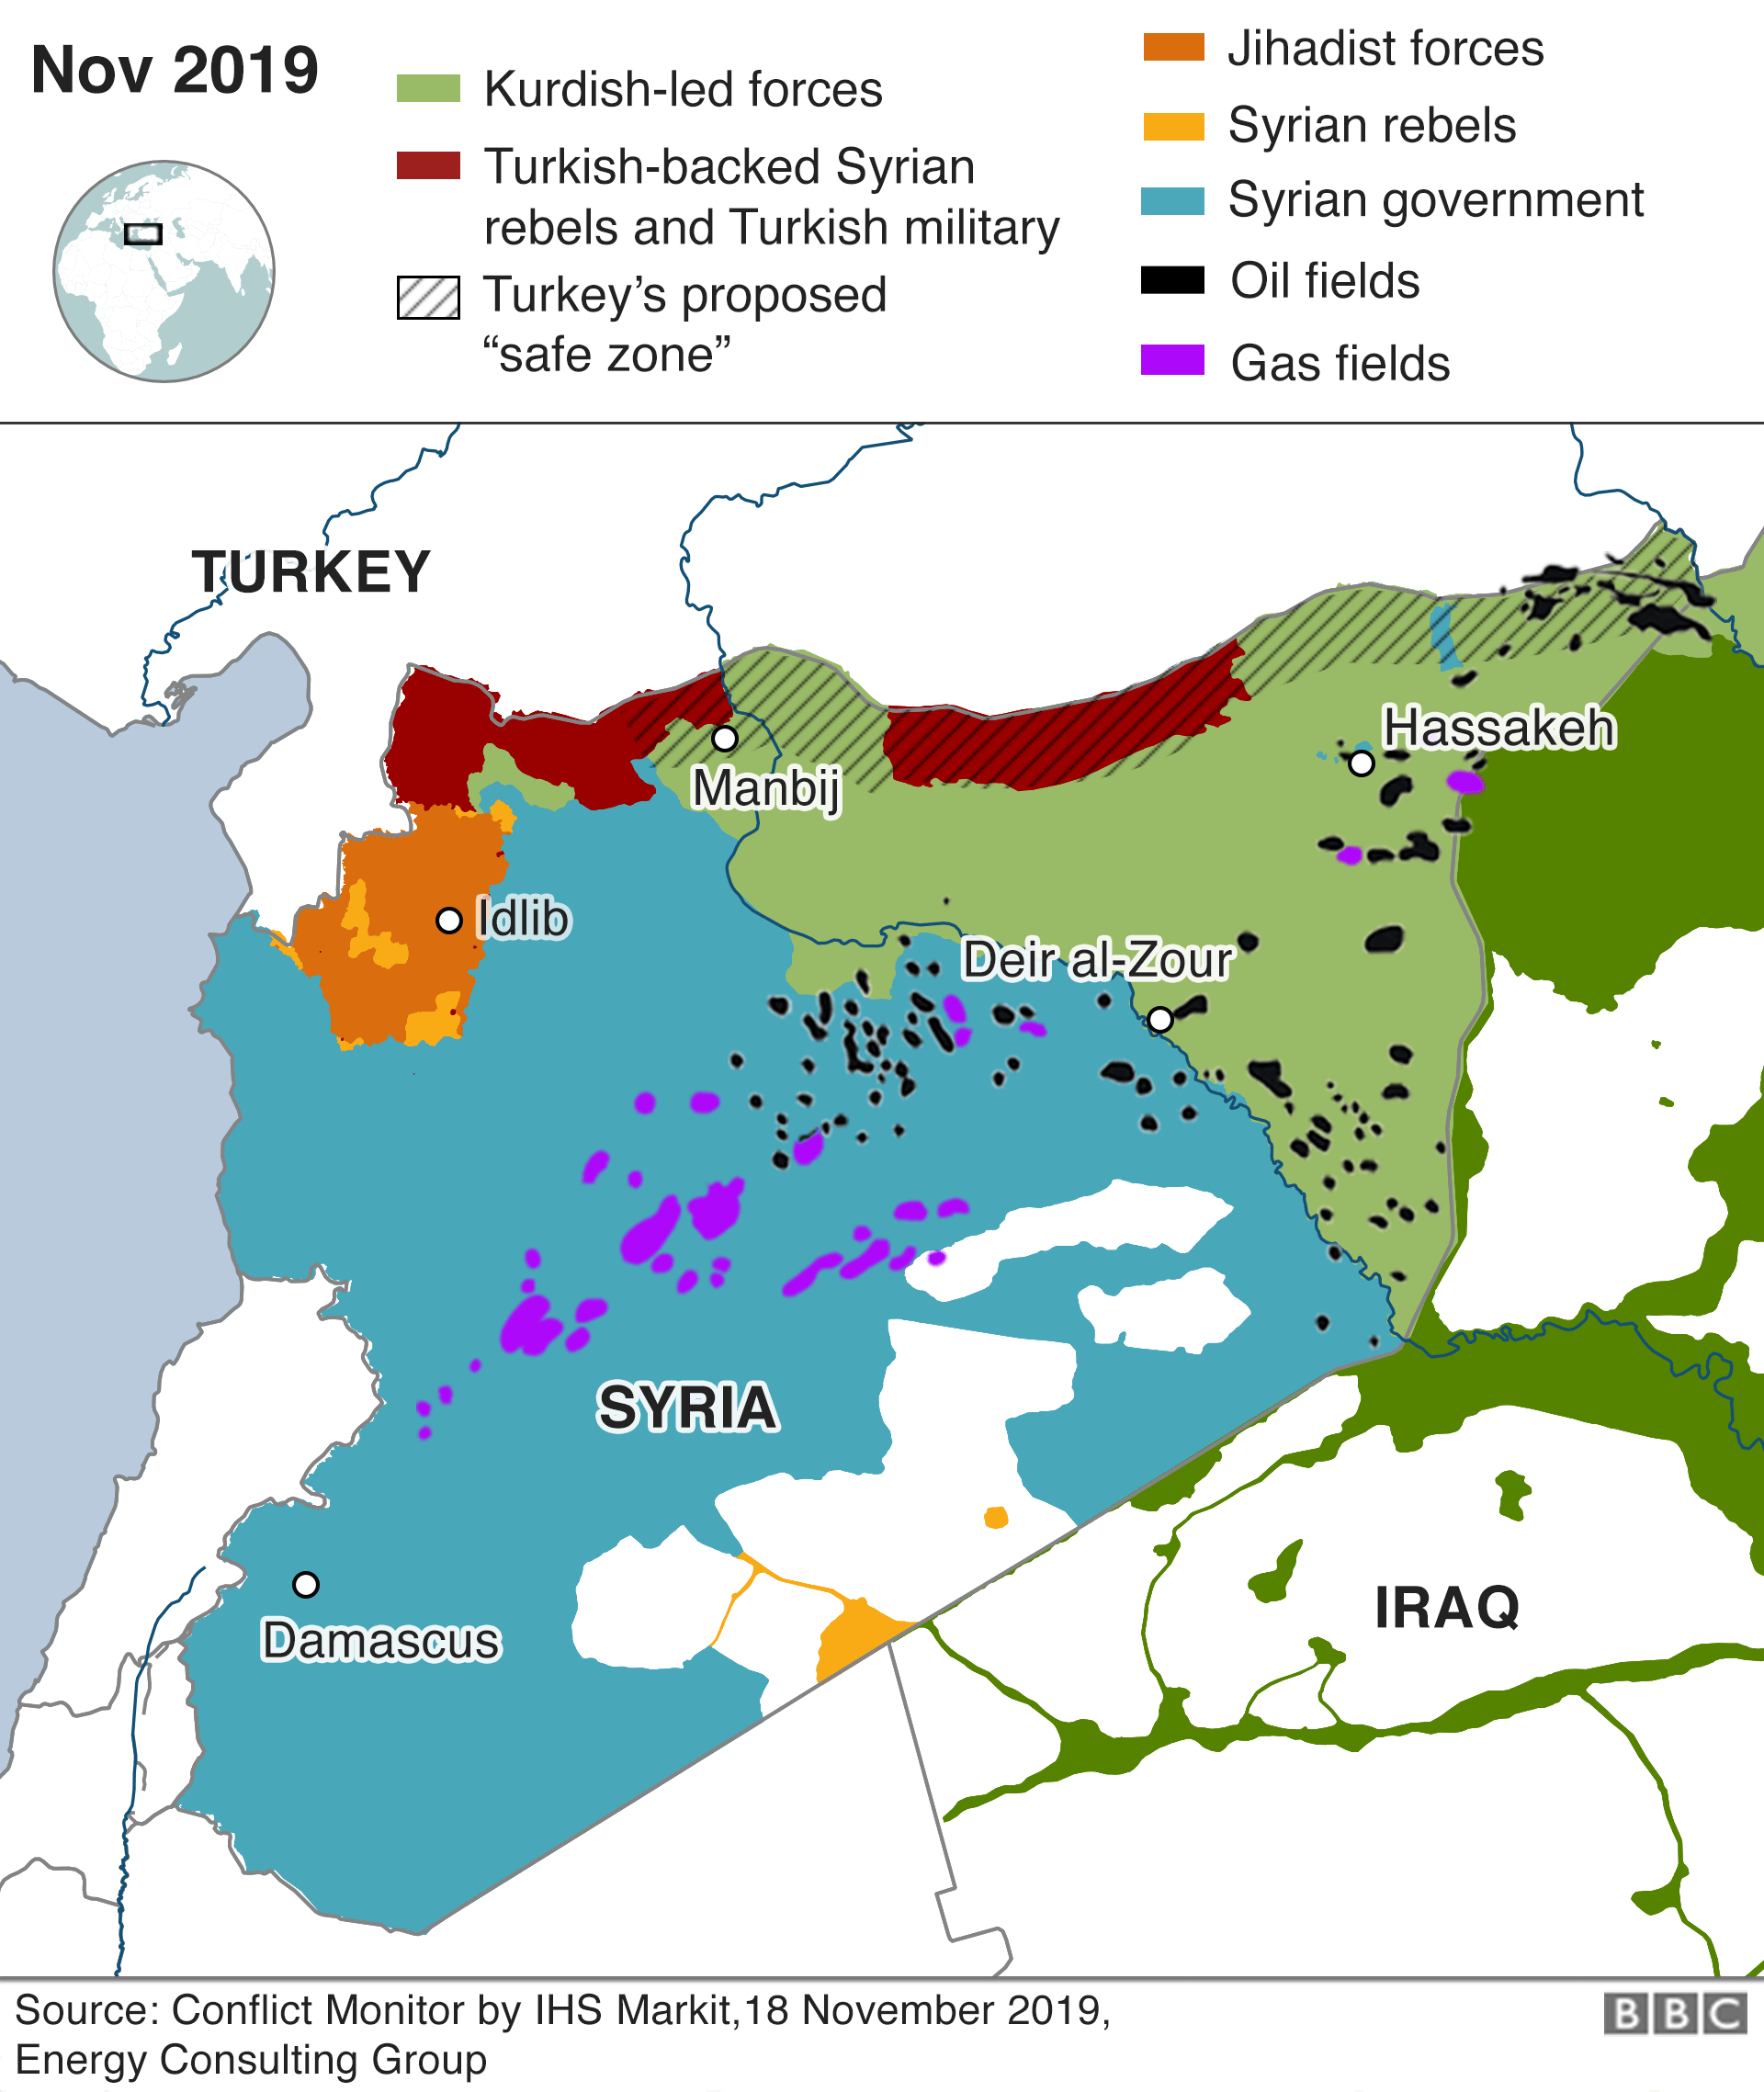 Map of Syria showing oil and gas fields